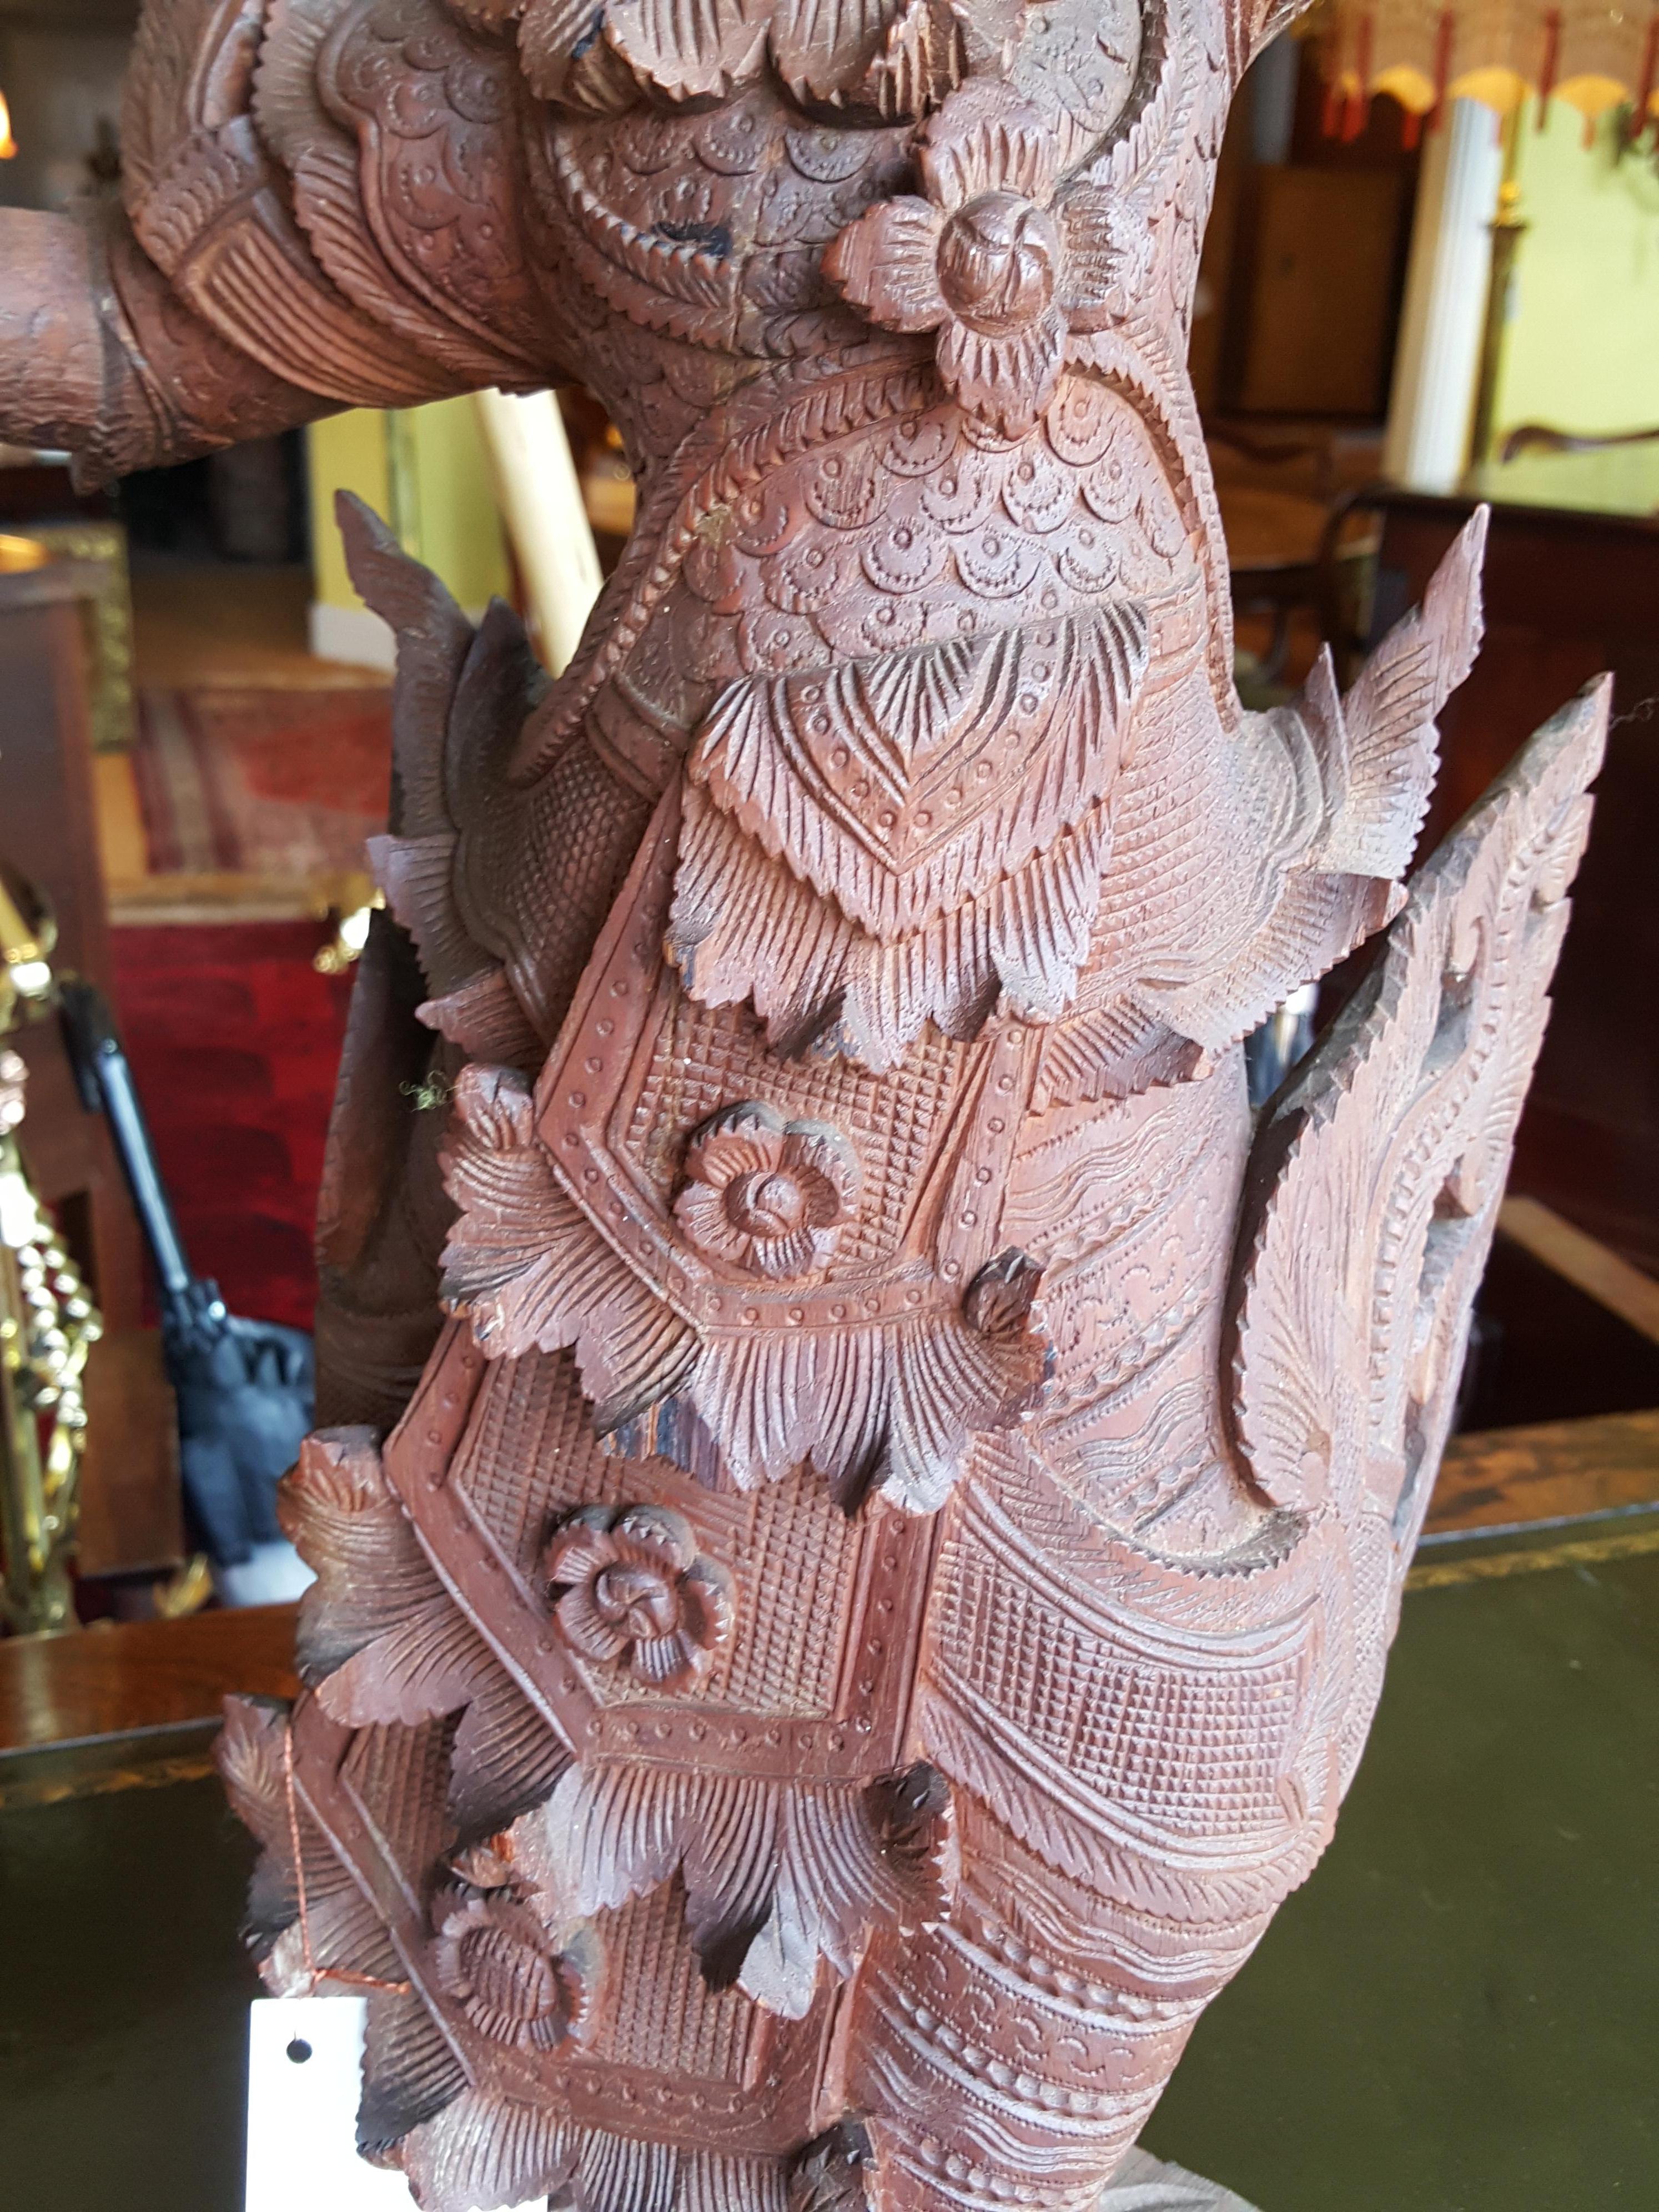 Teak Late 19th Century Indonesian Wood Carving